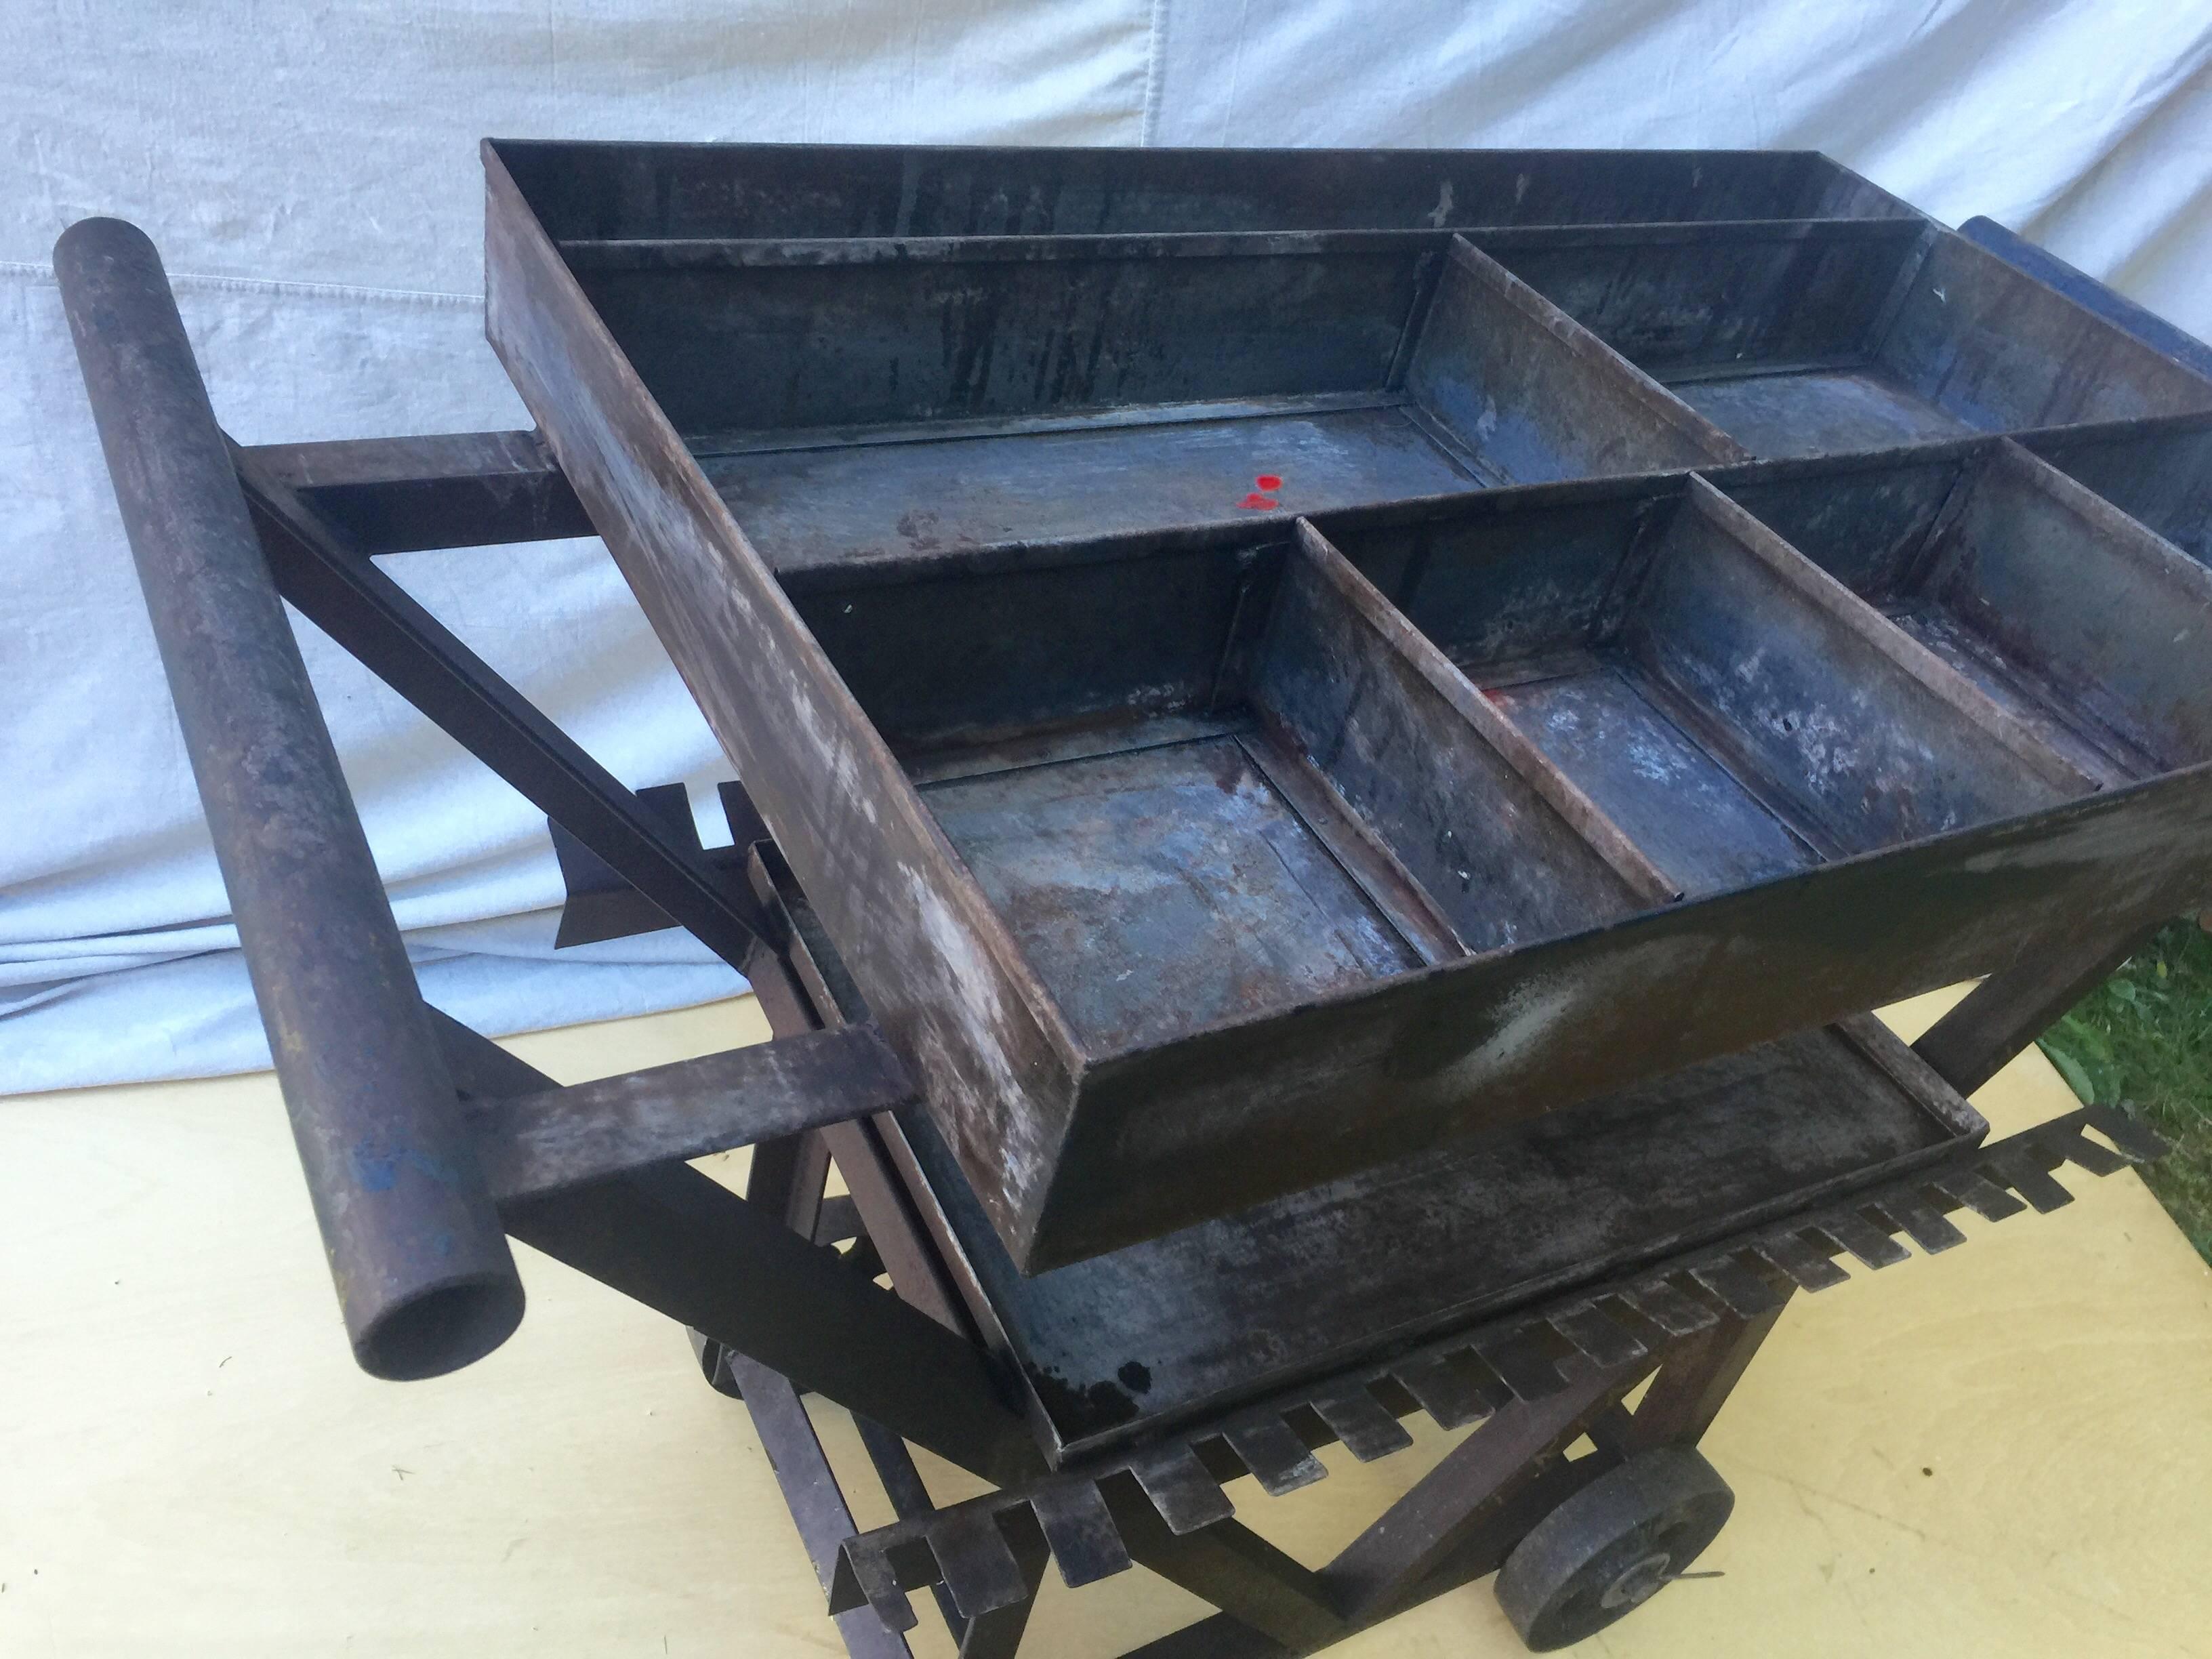 Funky and sculptural iron cart with great function and form. All hand-forged except for the manufactured wheels. Script lettering show the origin as triangle metals. Large sectioned top and lower tray make a quirky and useful bar cart or display,